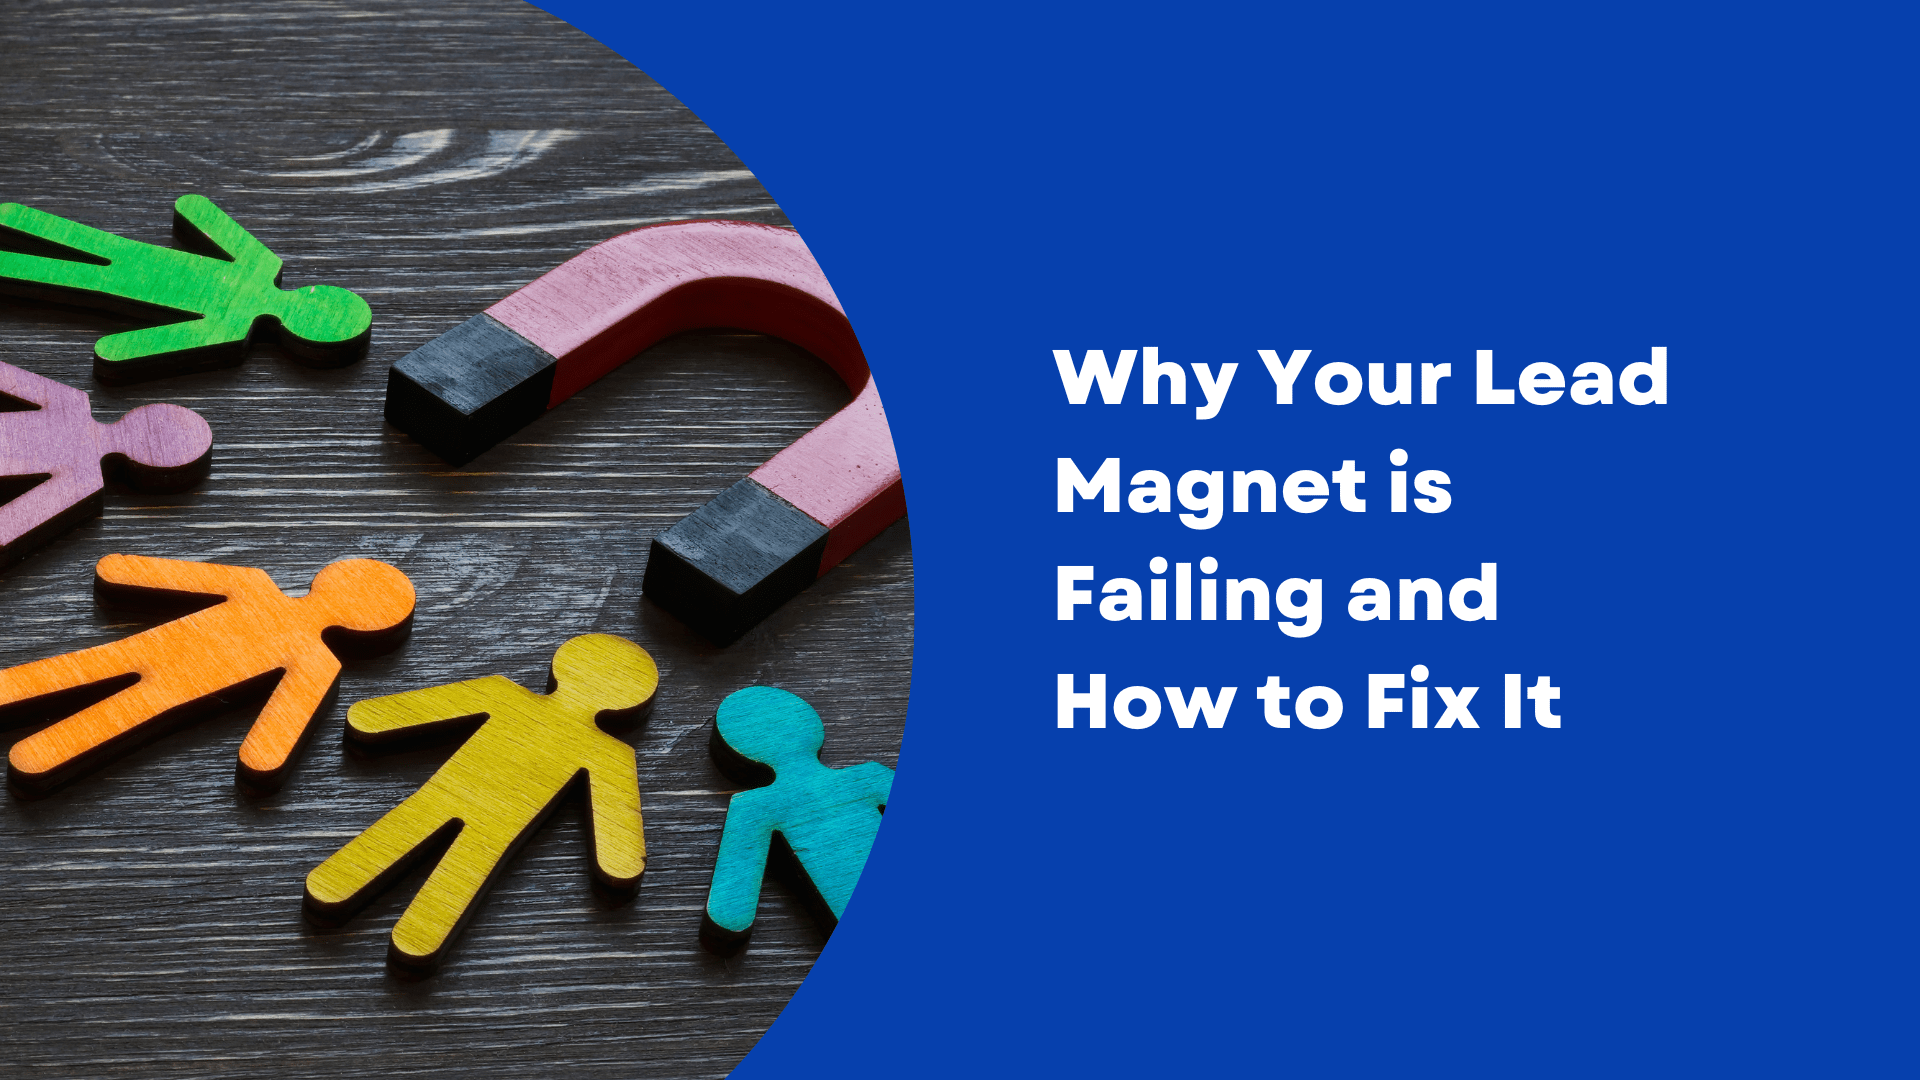 Why Your Lead Magnet is Failing and How to Fix It